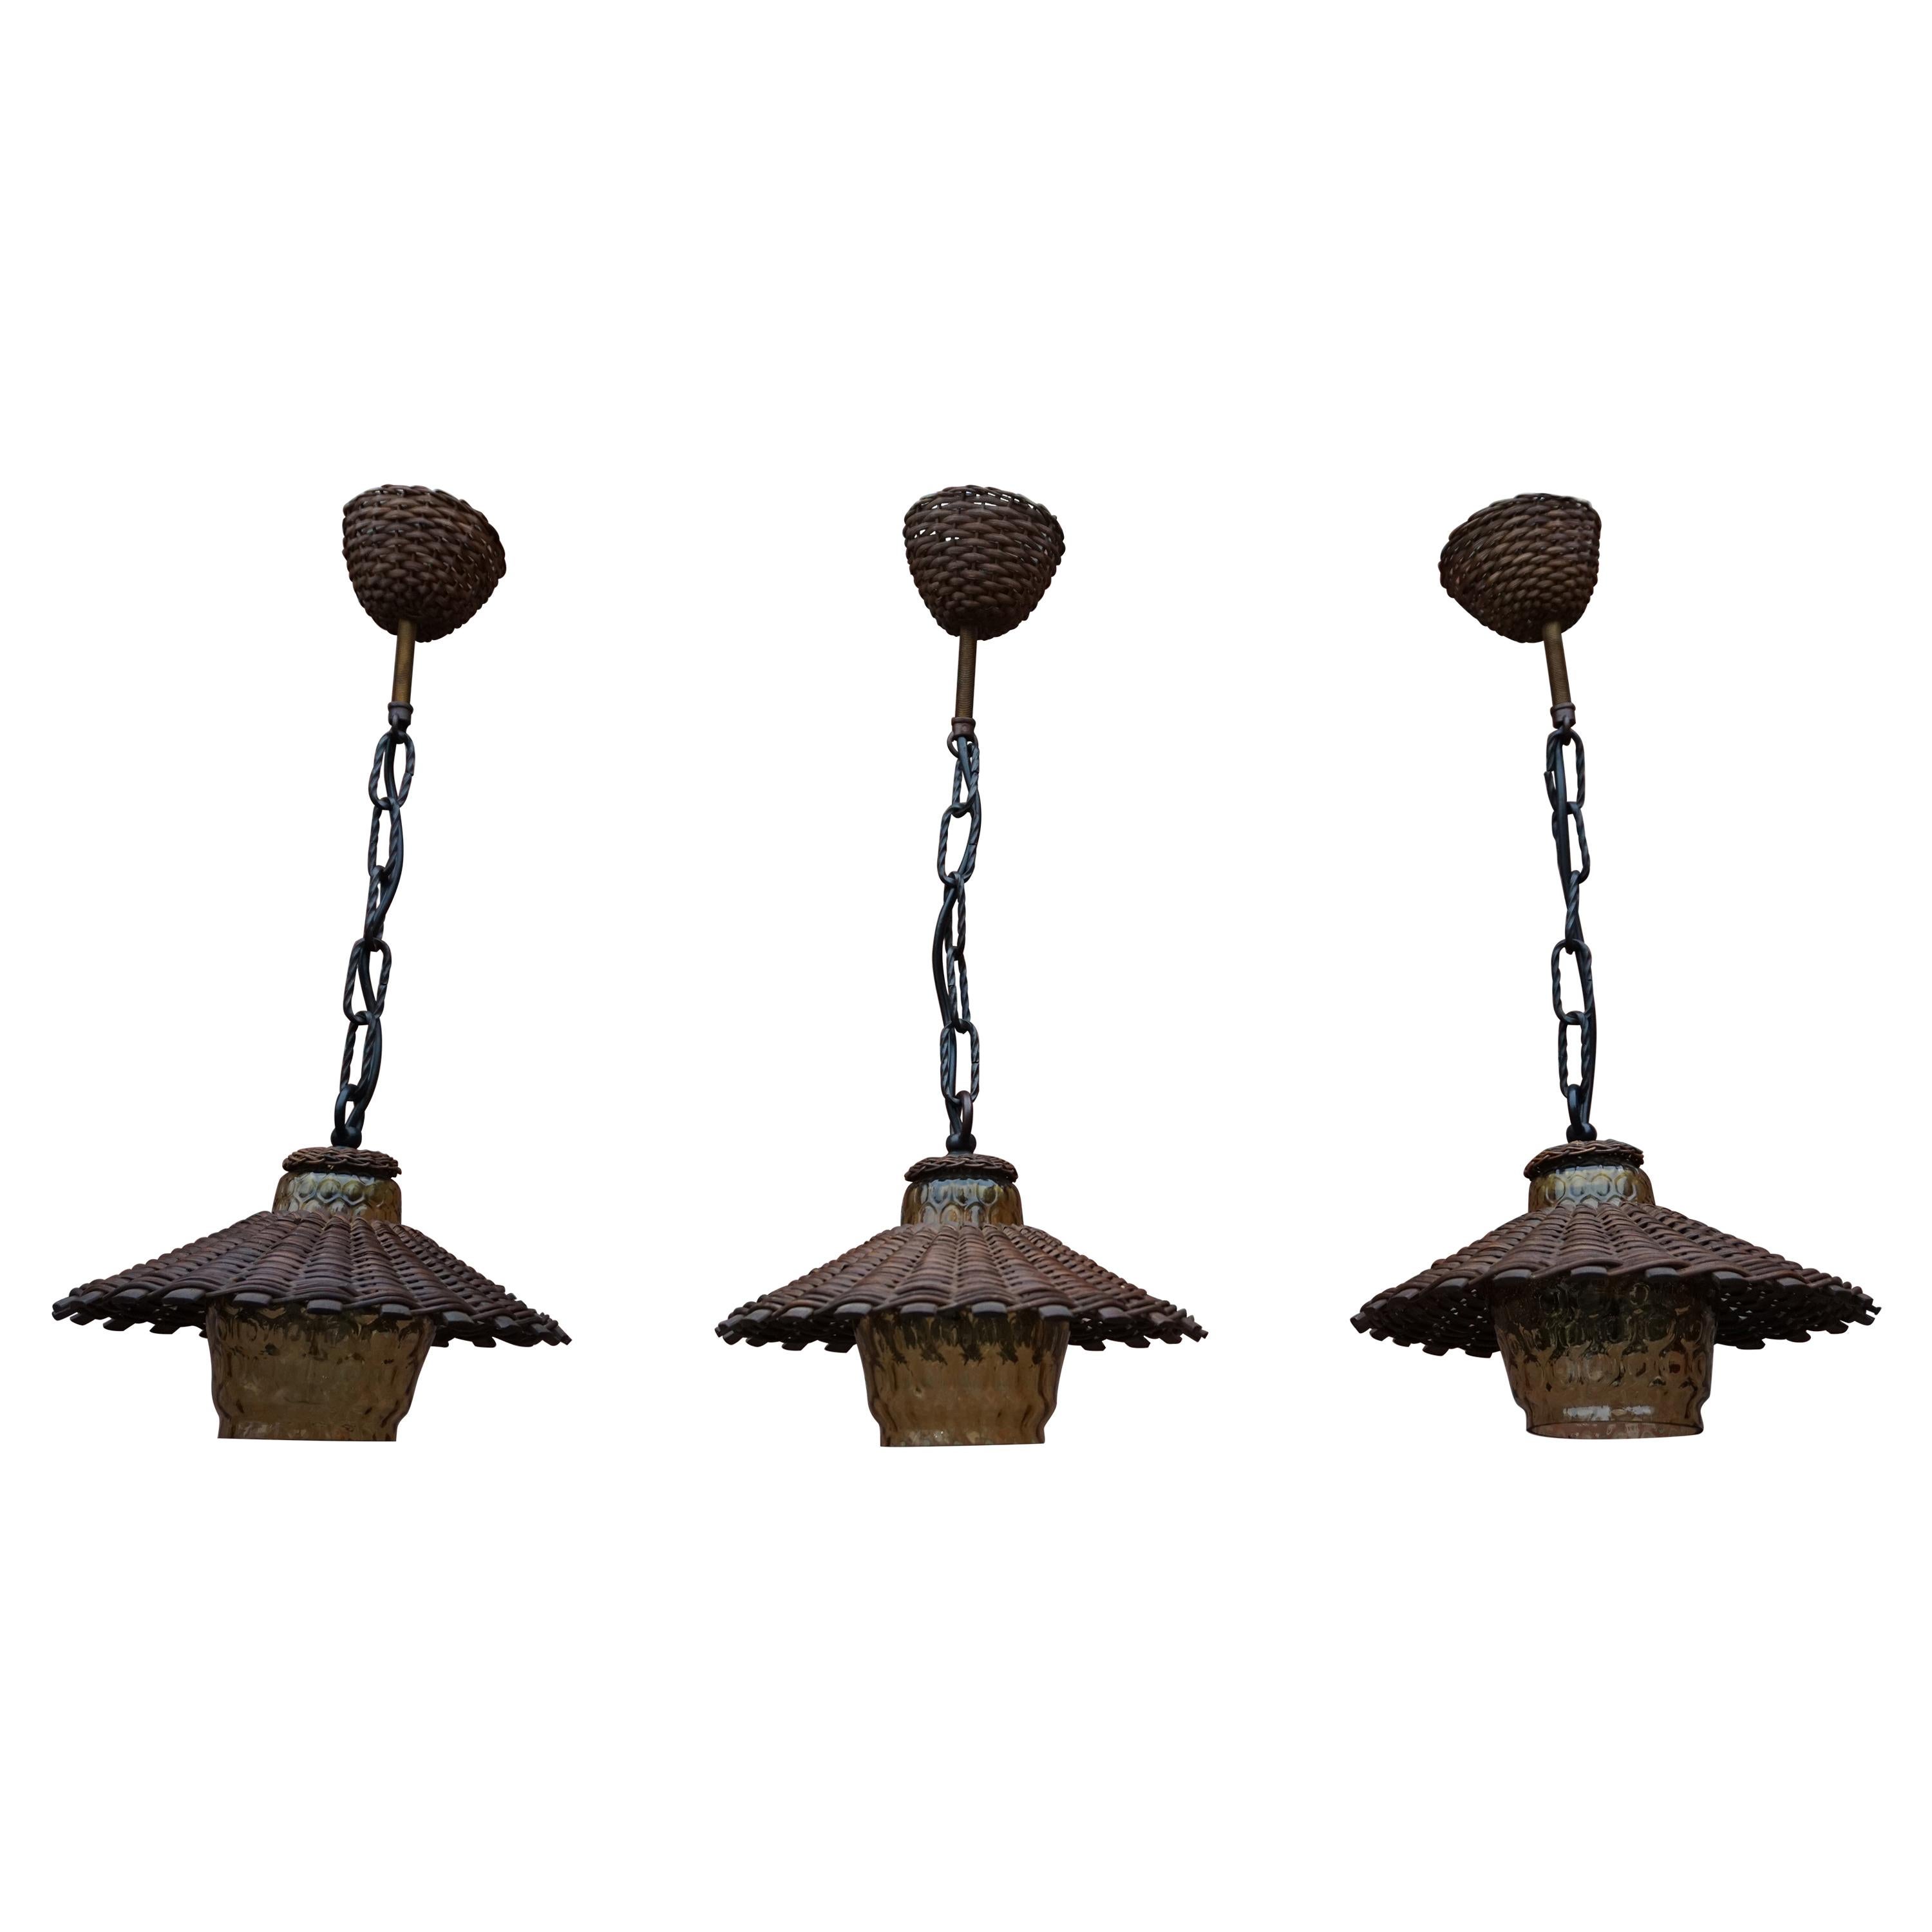 Unique Set of 3 Midcentury Organic Handcrafted Wicker and Glass Pendants Lights